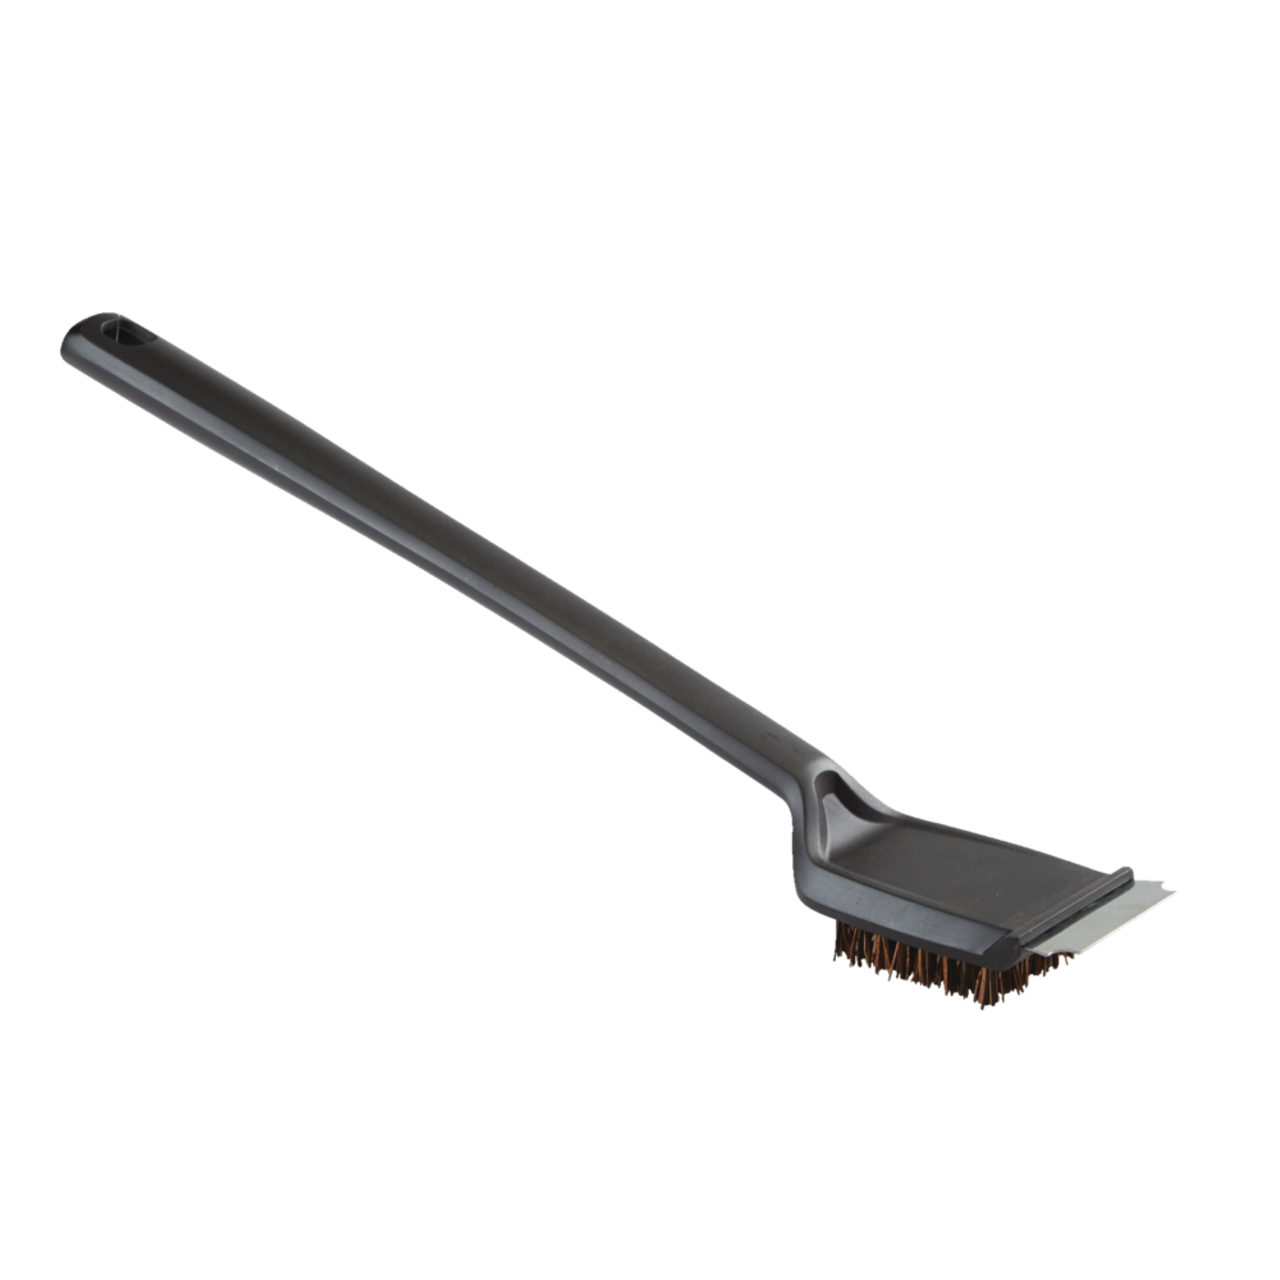 https://media-www.canadiantire.ca/product/seasonal-gardening/backyard-living/outdoor-cooking-accessories/0852256/master-chef-18-palmyra-grill-brush-b3e20488-9733-474c-9471-f5a28697d783.png?imdensity=1&imwidth=640&impolicy=mZoom